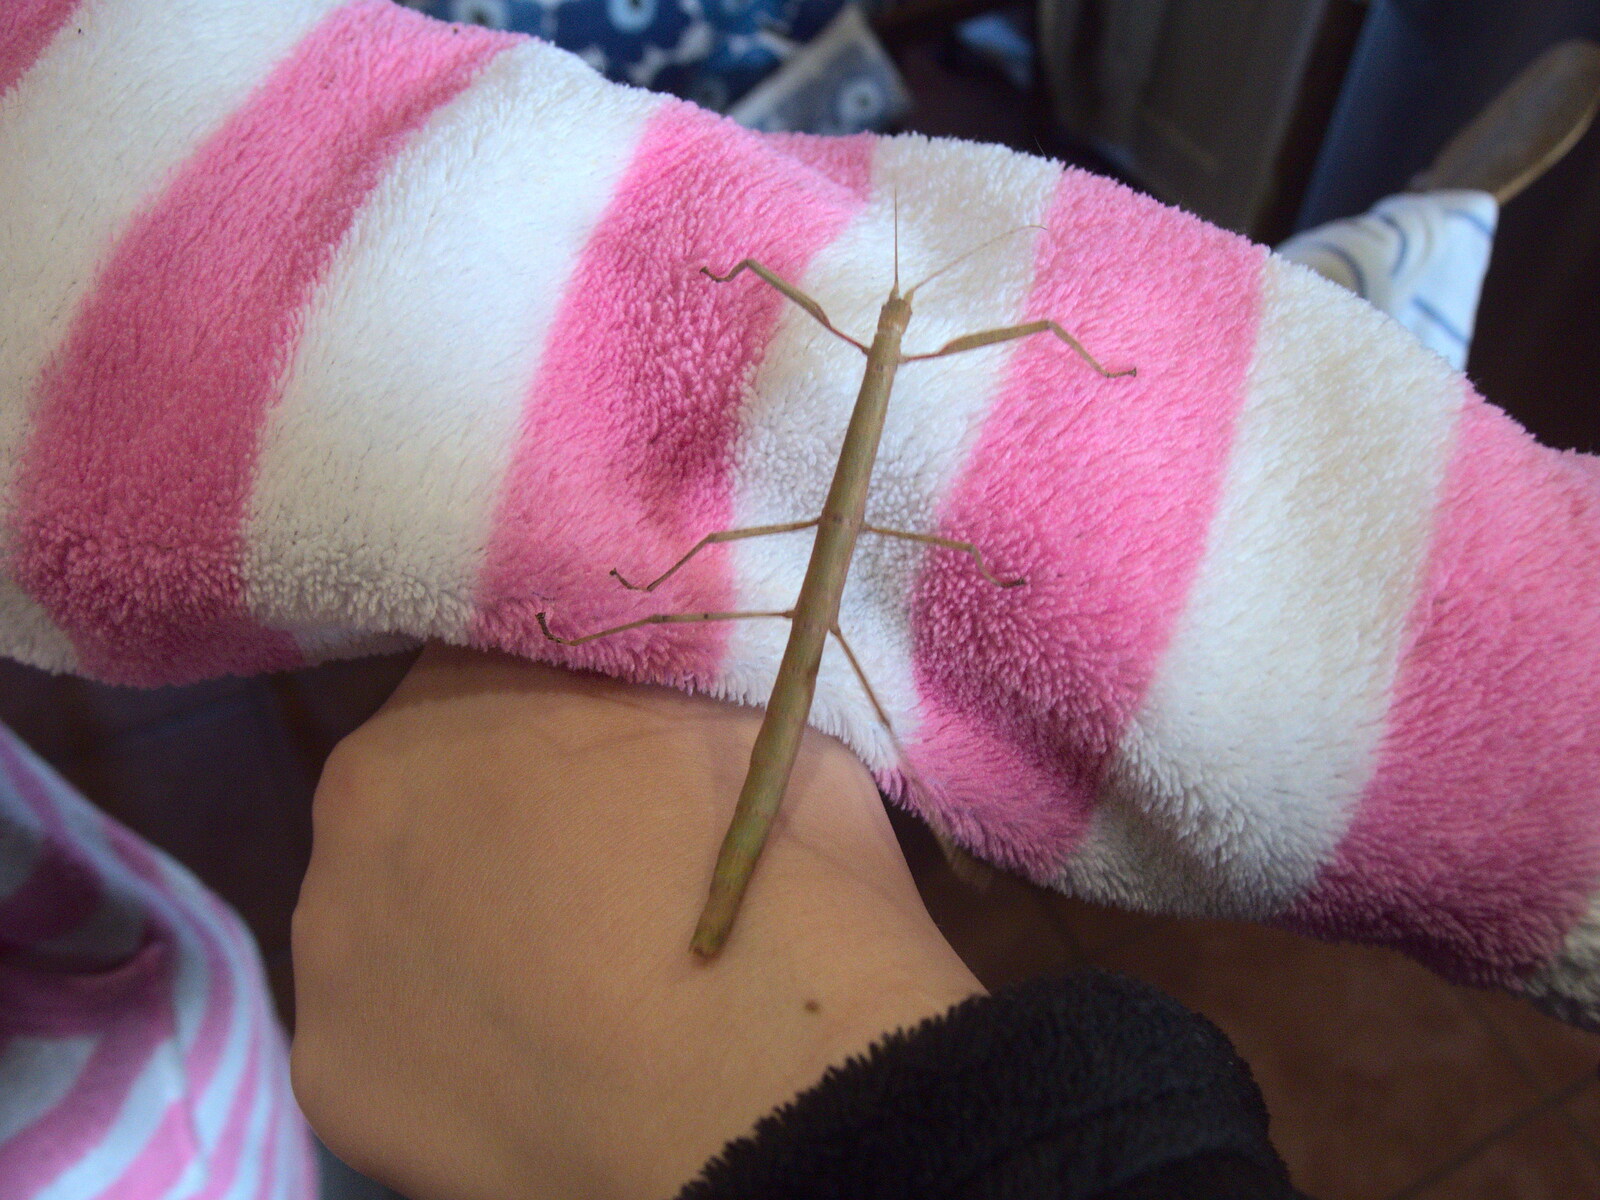 Stephanie, the boys' new Stick Insect from Diss Express Photos and a Garden Den, Eye, Suffolk - 23rd February 2019